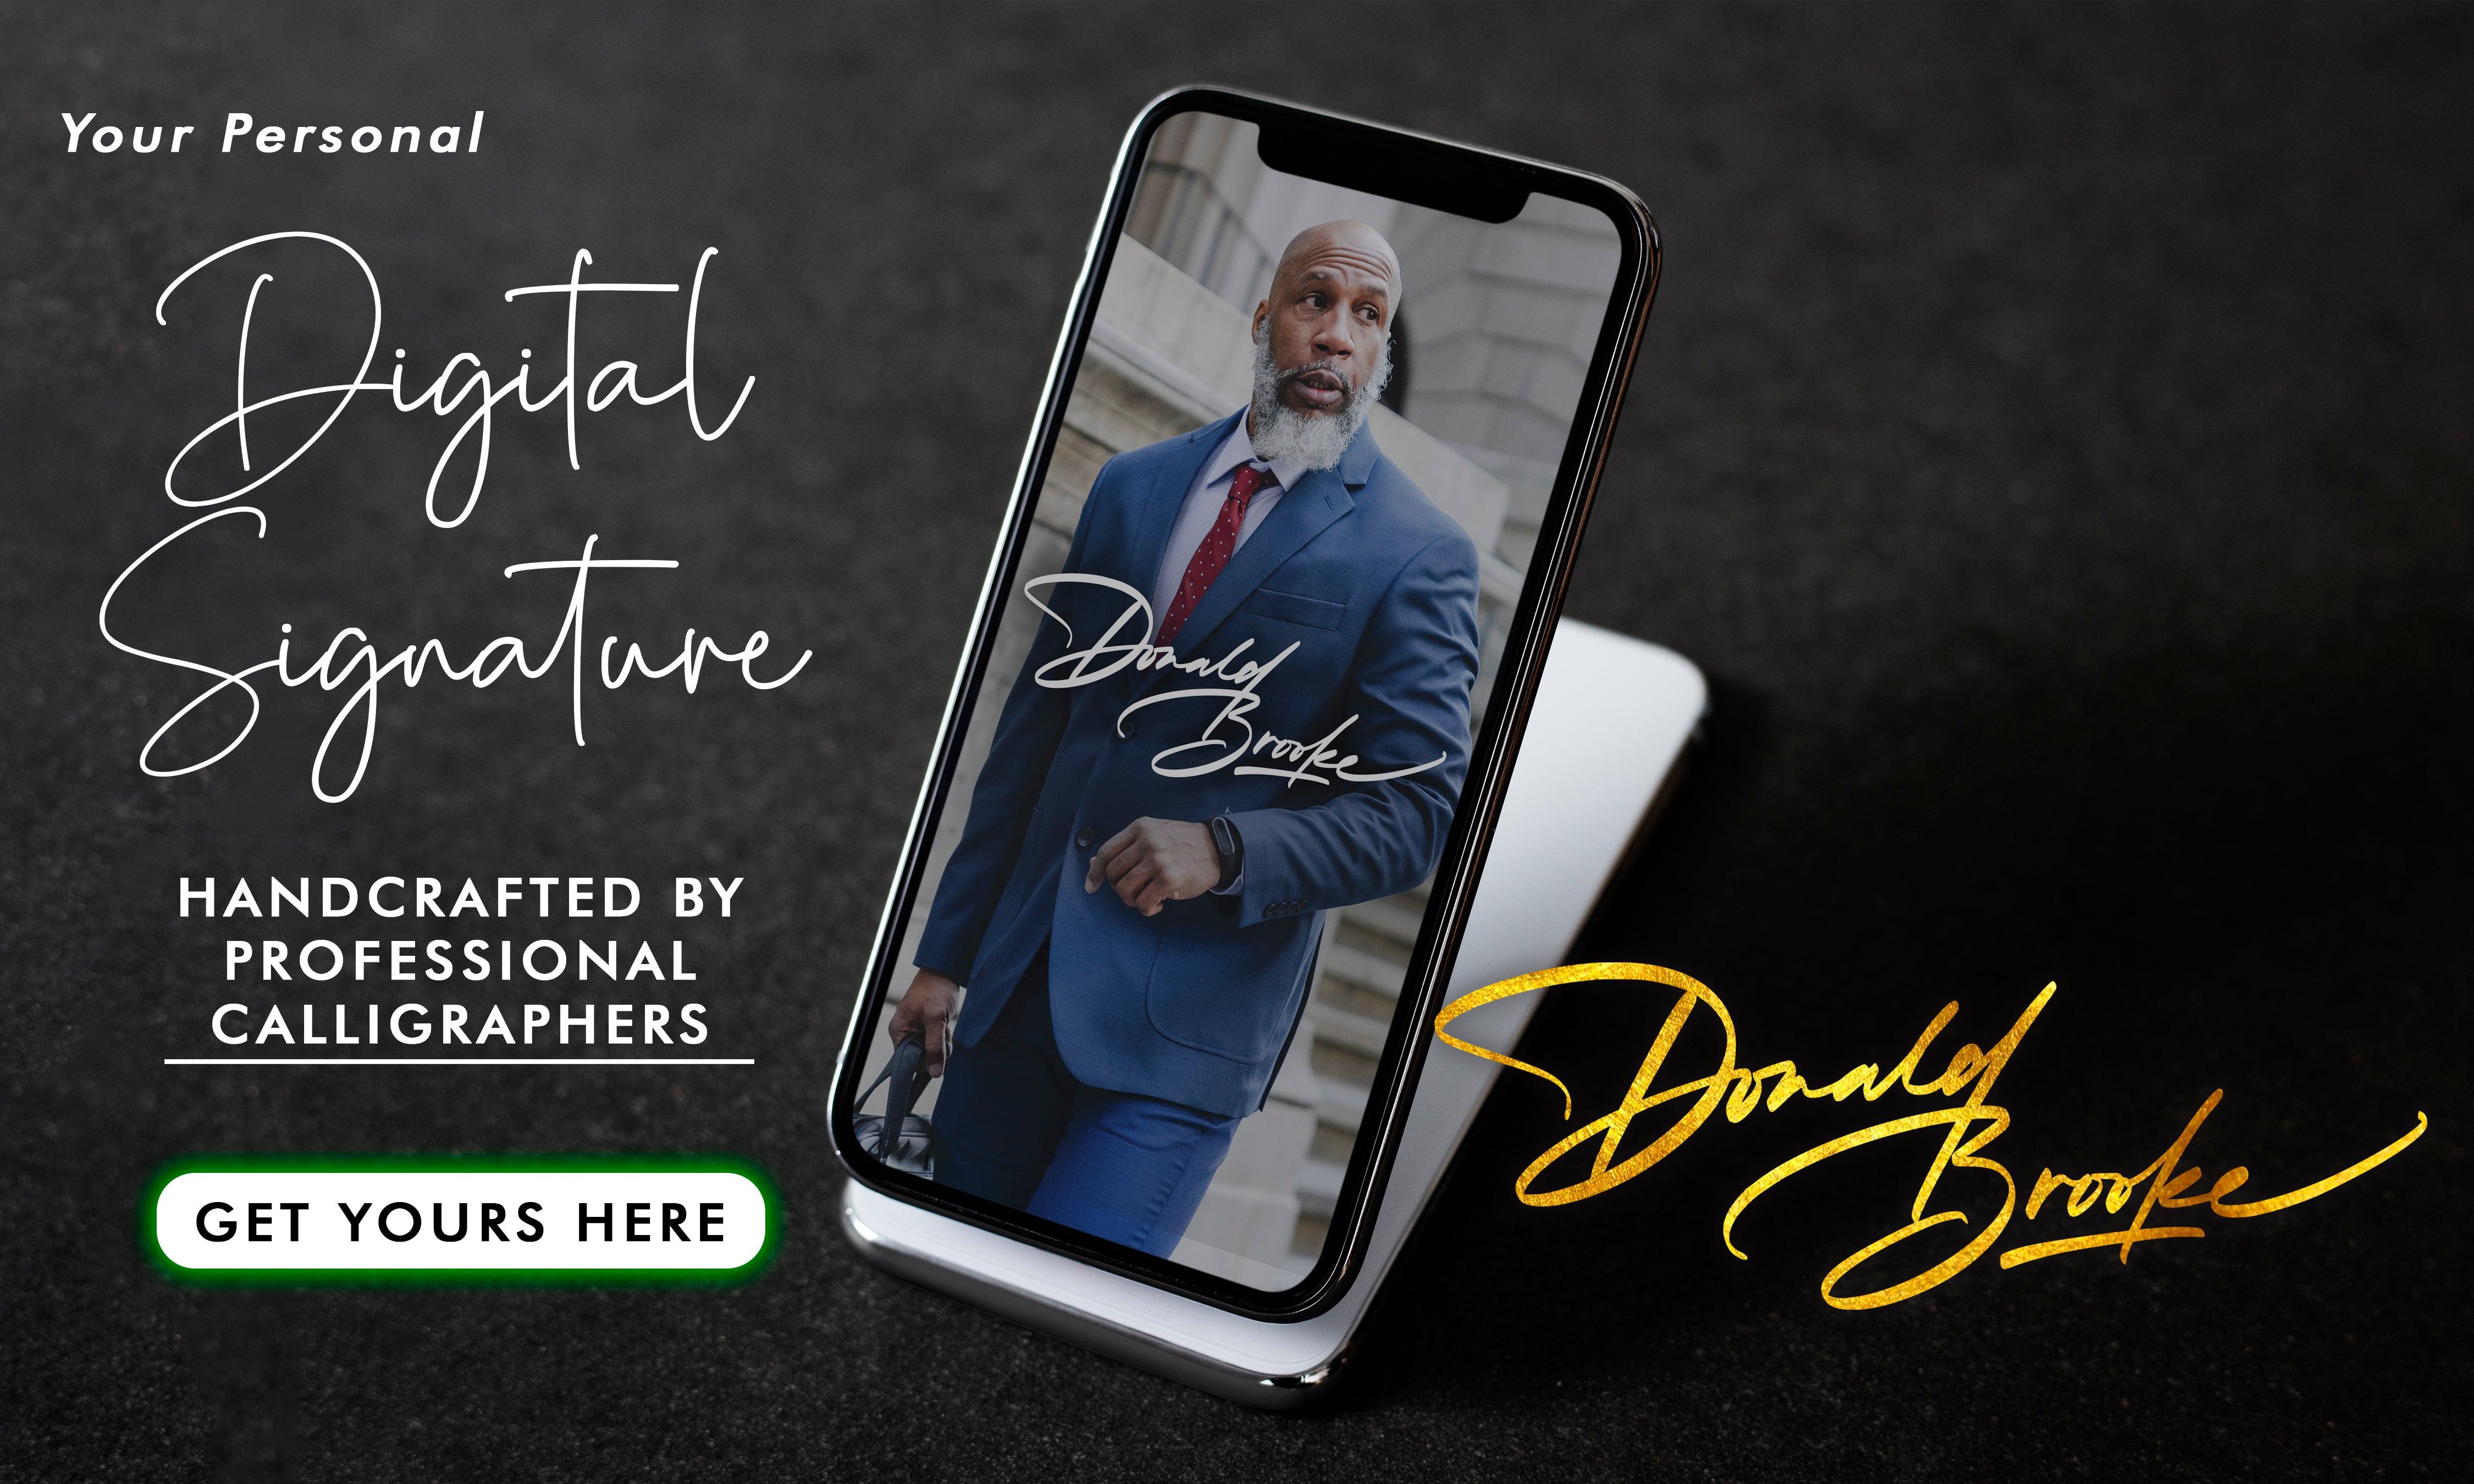 See the modern way to showcase your skills and contact information with a digital business card. Elevate your professional image and make lasting connections.